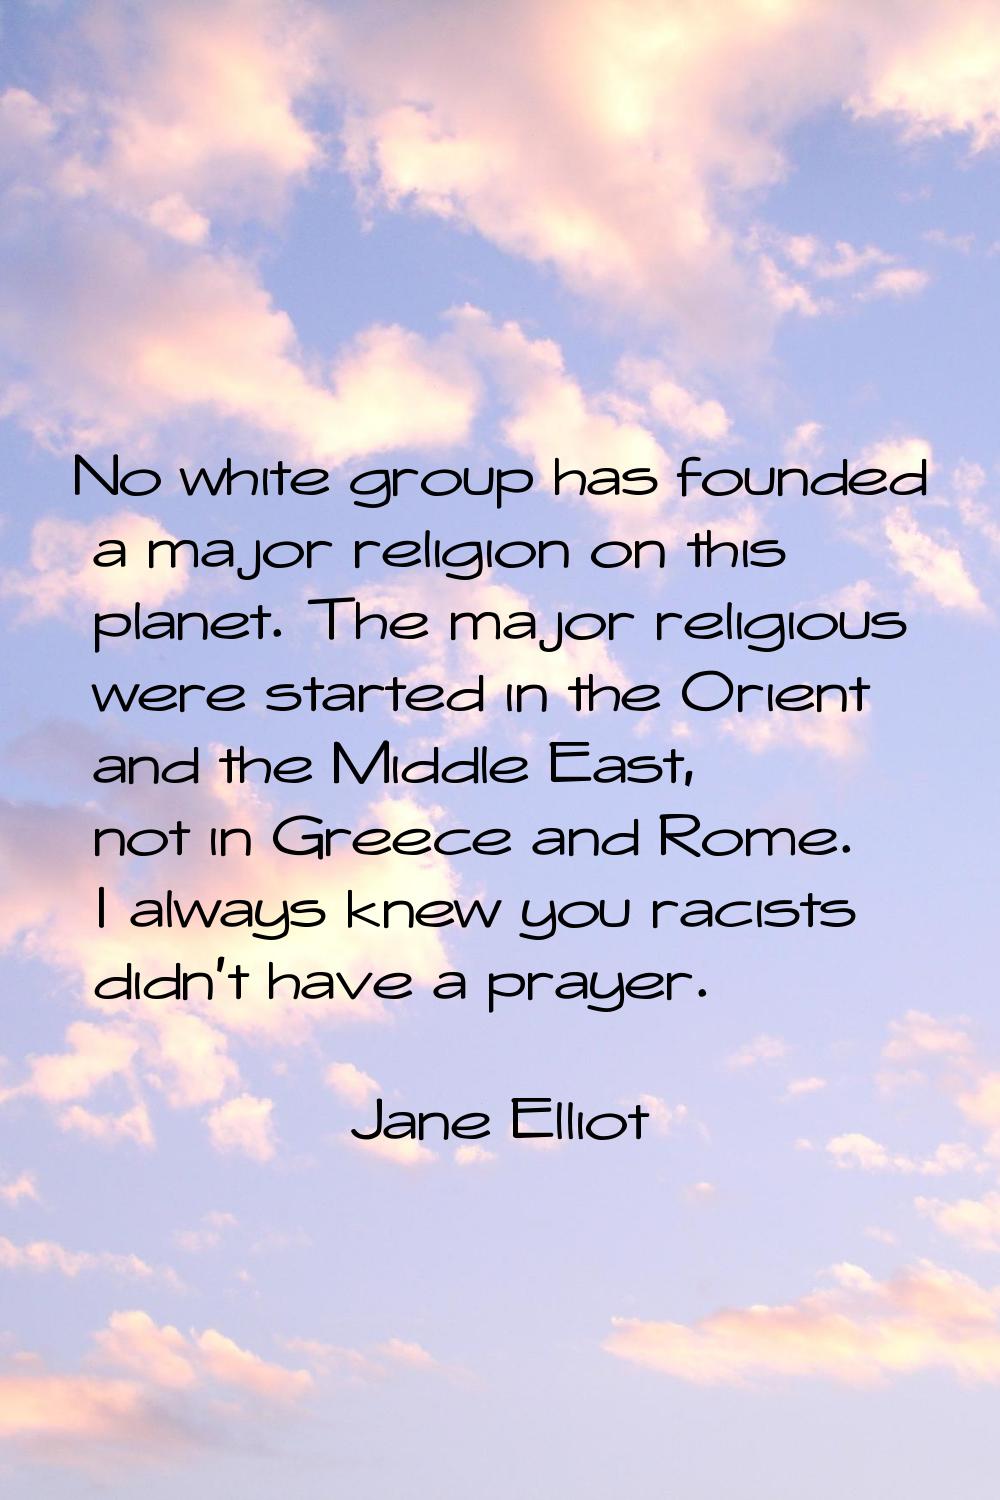 No white group has founded a major religion on this planet. The major religious were started in the